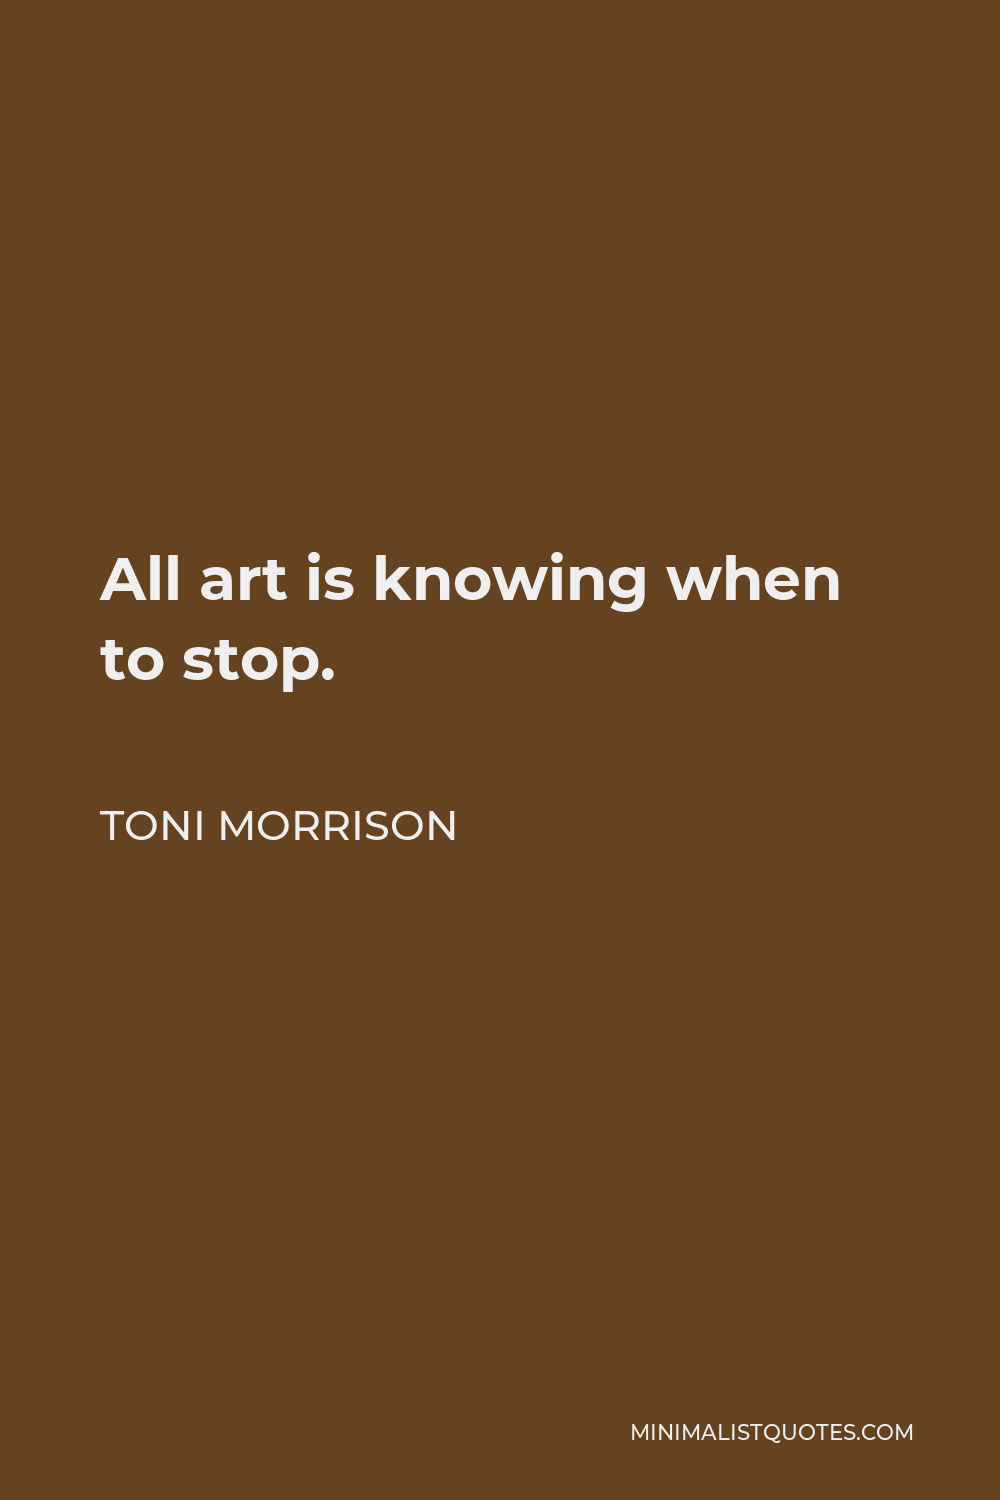 Toni Morrison Quote - All art is knowing when to stop.